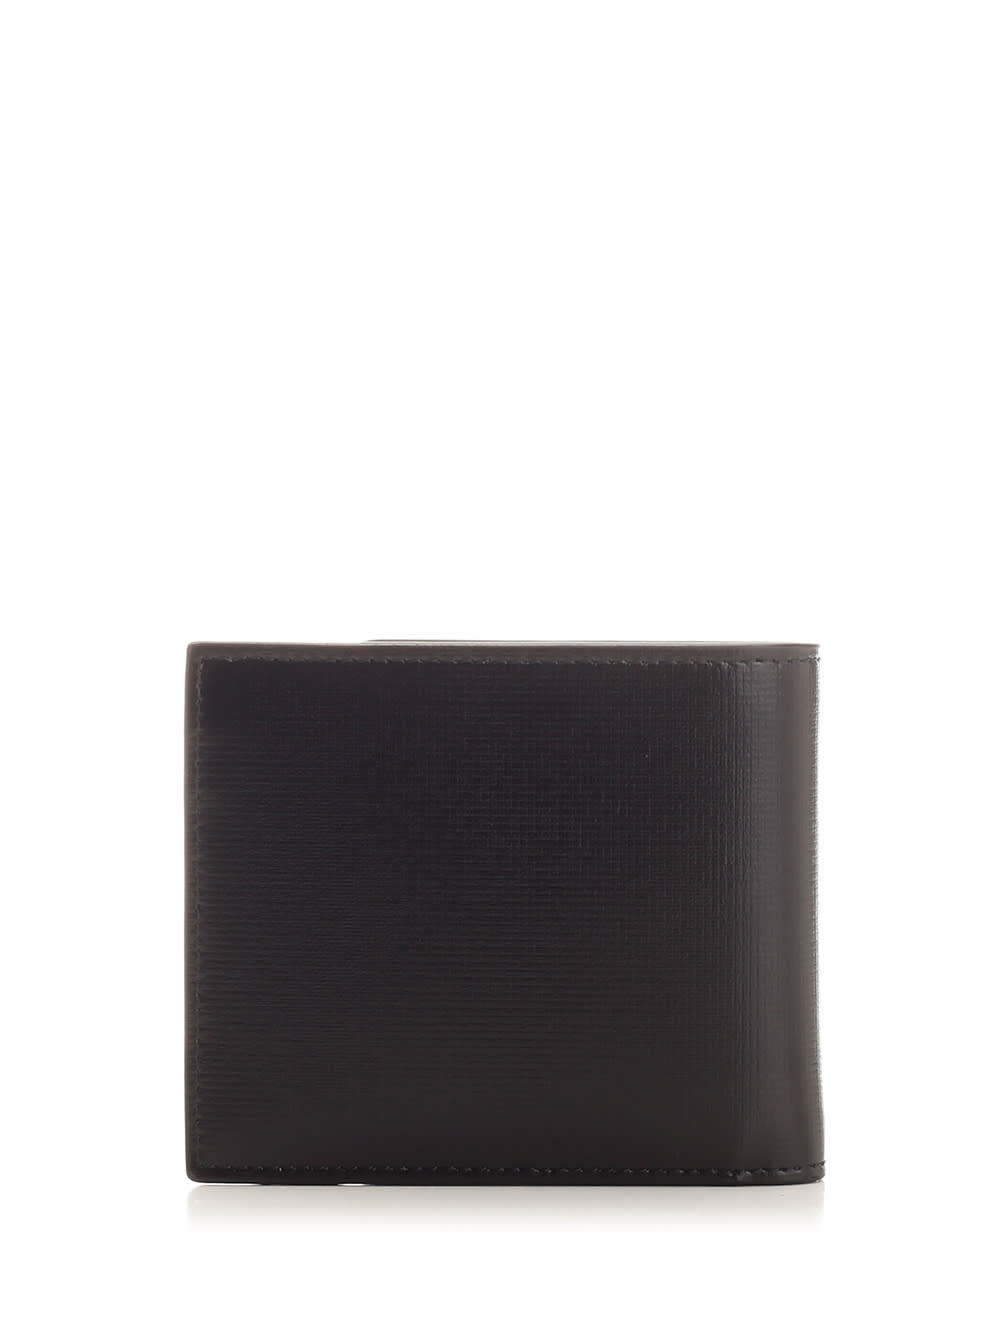 Shop Givenchy Bifold Wallet In Black Leather